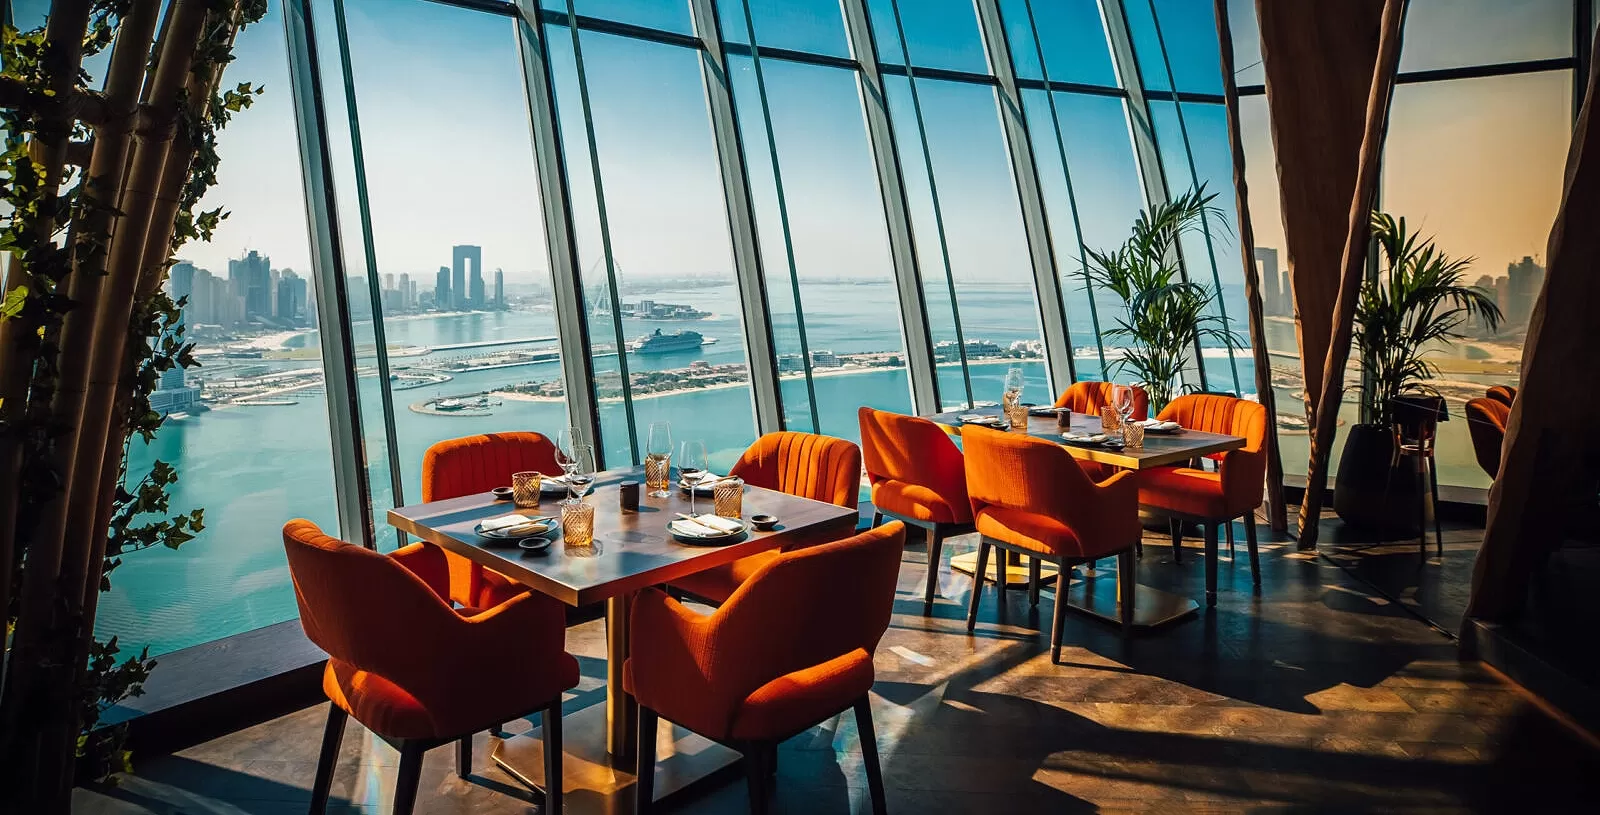 Luxury Restaurants In Dubai With The Best Views | Quintessentially